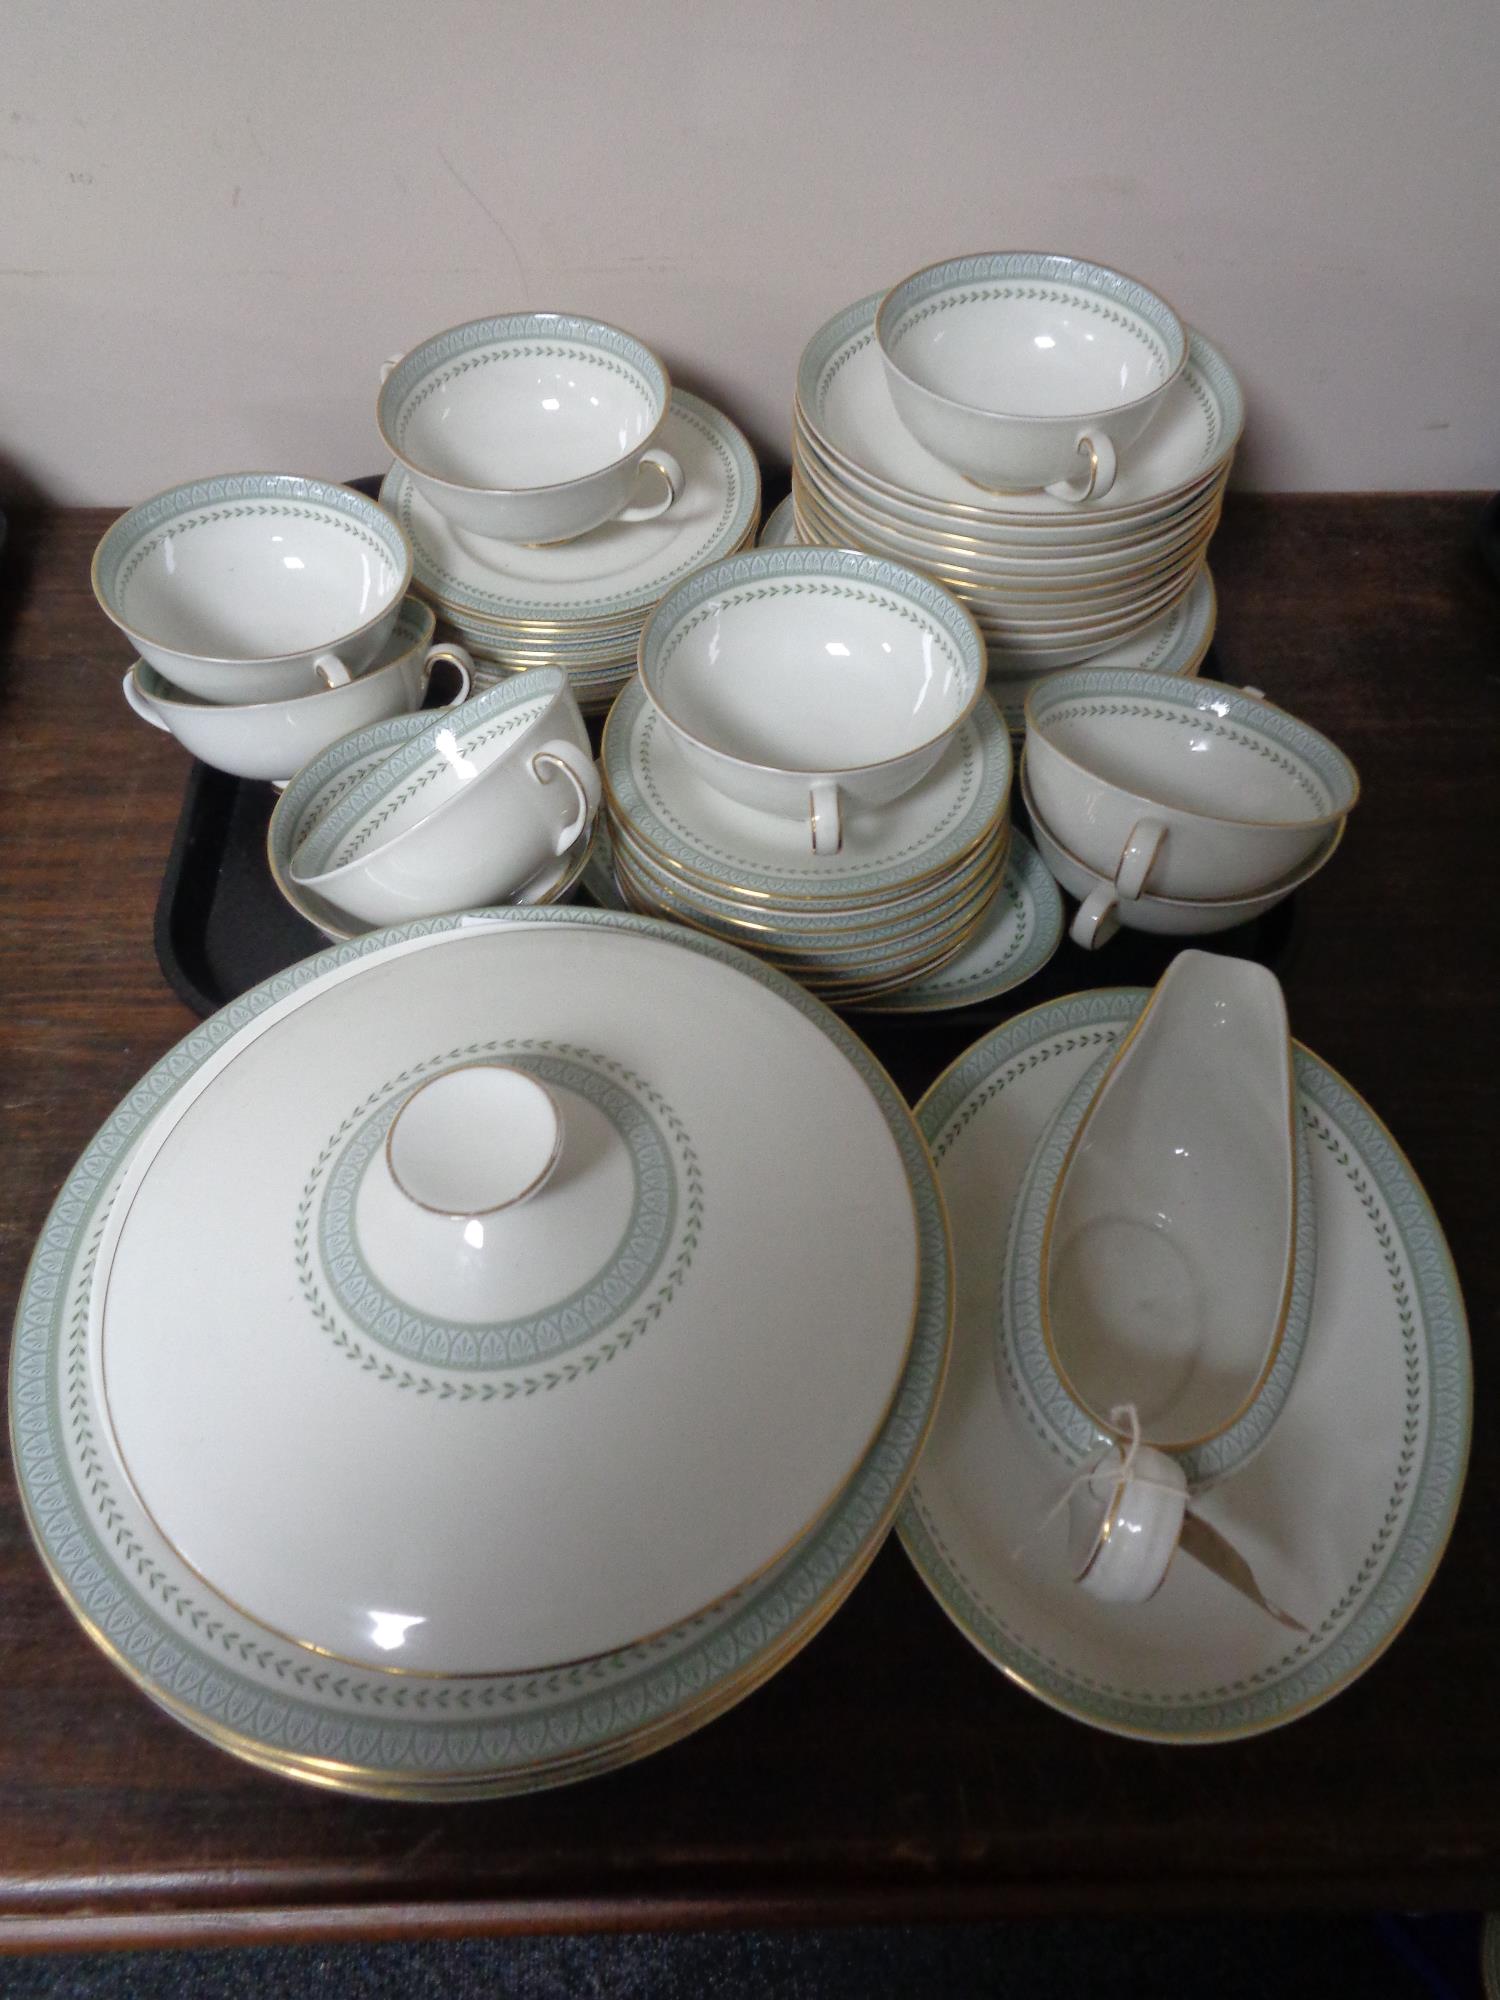 Approximately 48 pieces of Royal Doulton Berkshire tea and dinner china